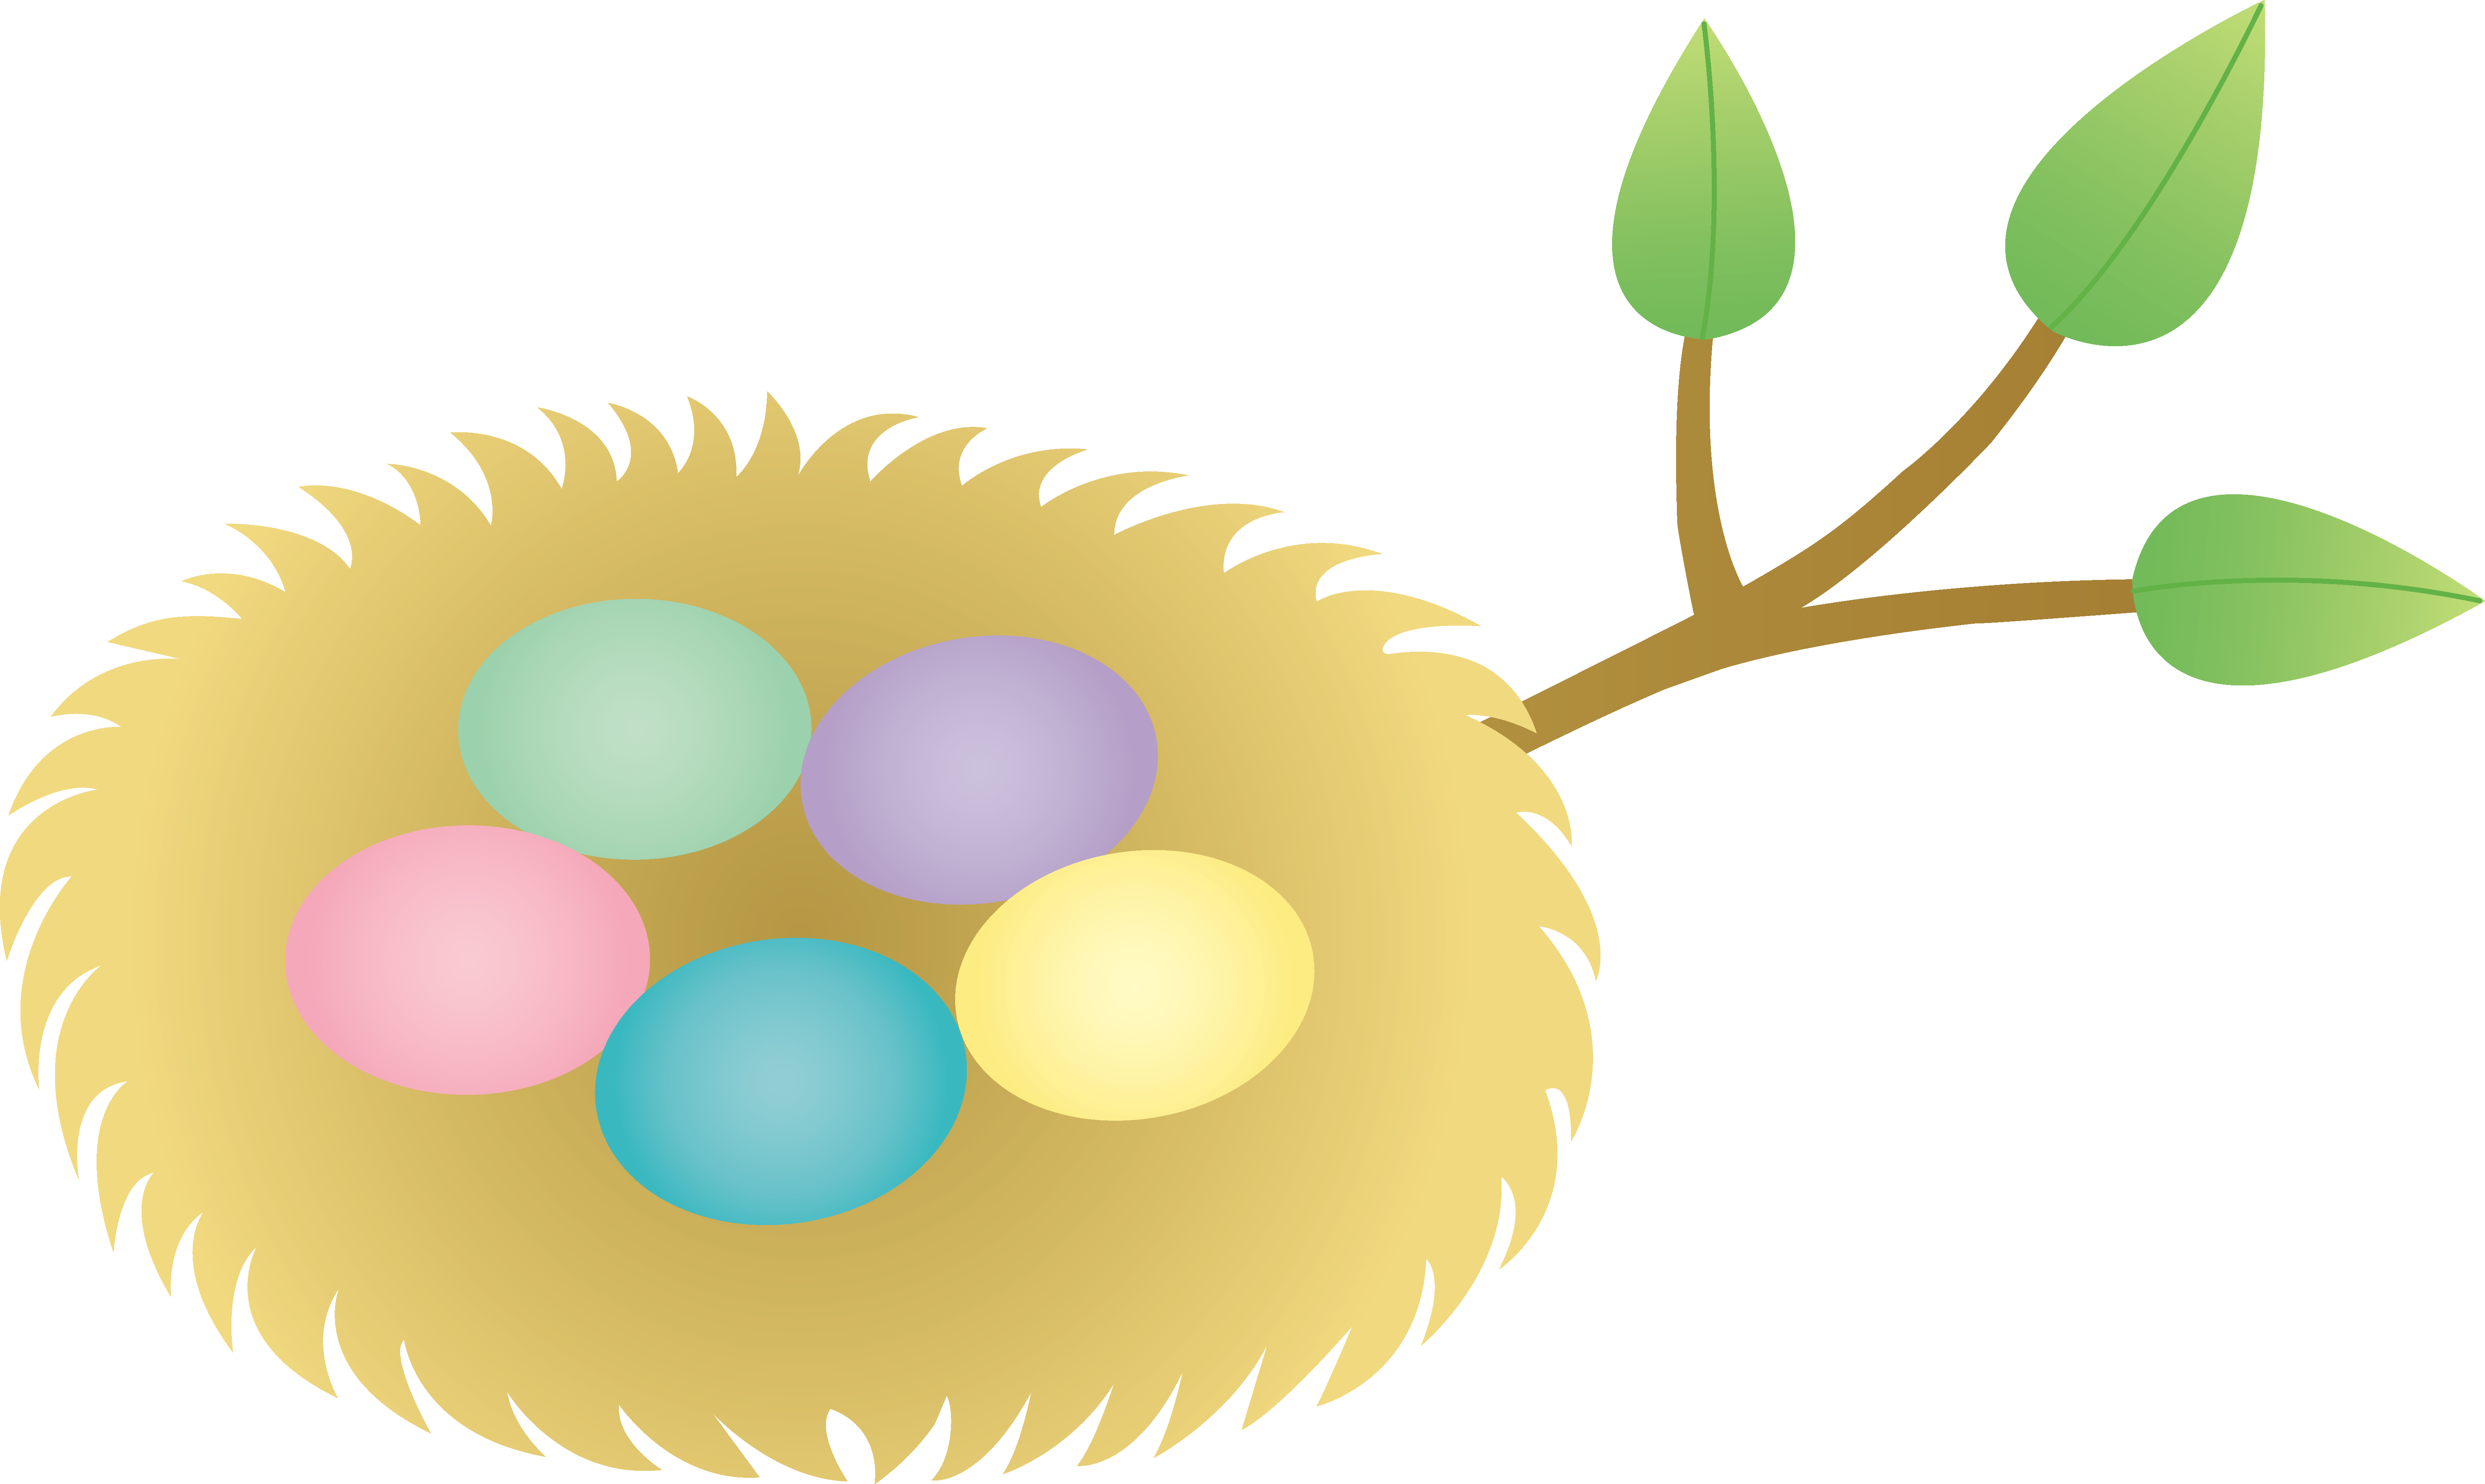 Free Easter Clipart Under 30 Kb | Clipart Panda - Free Clipart Images